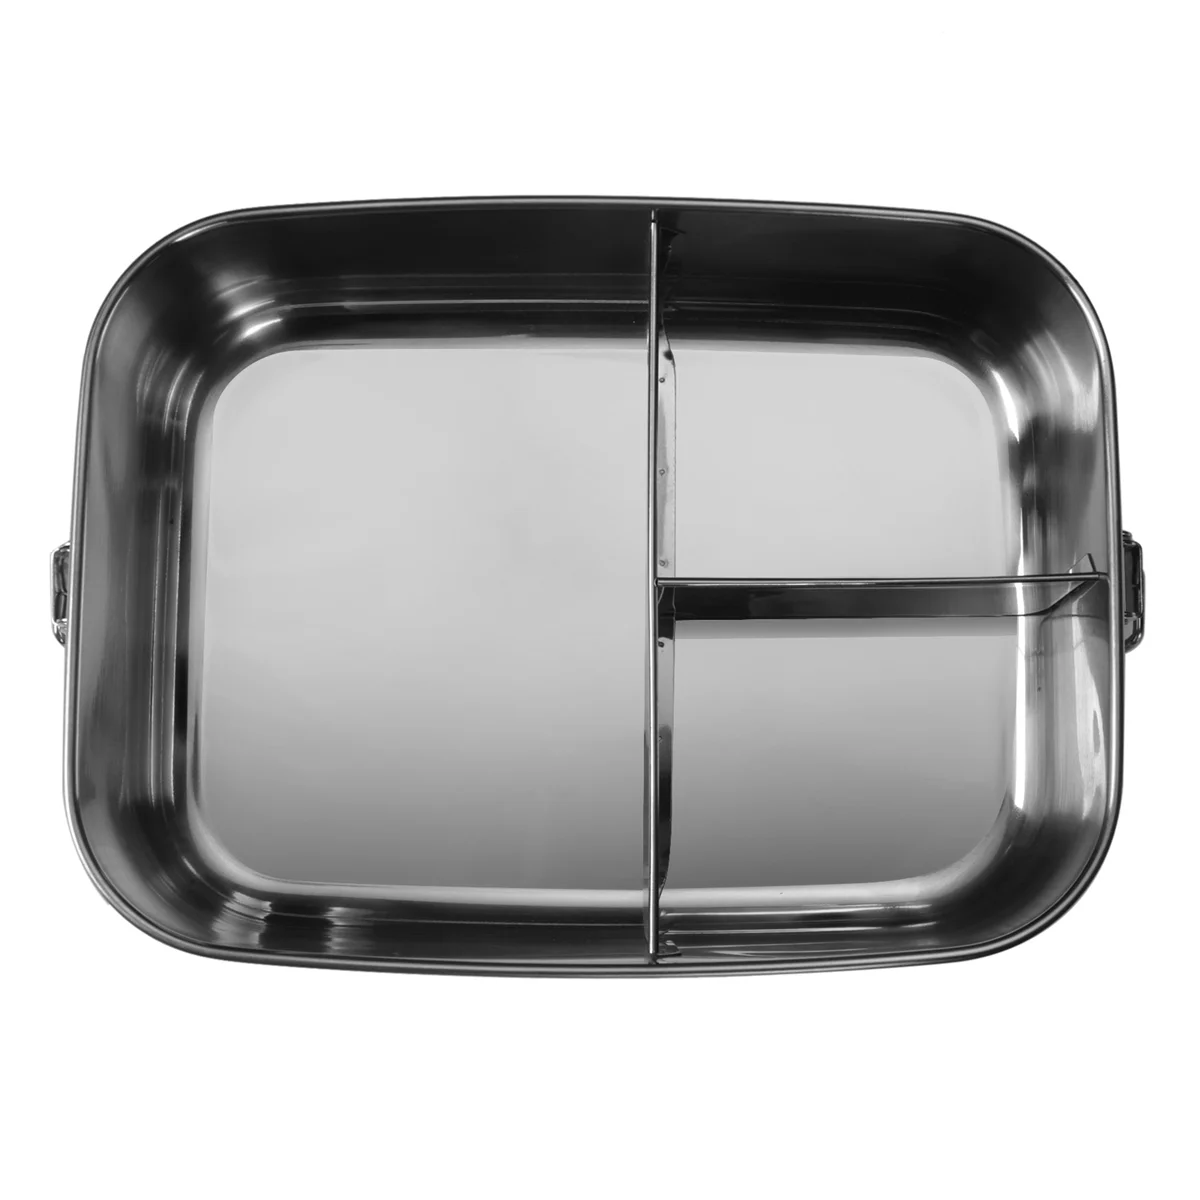 

2X Stainless Steel Bento Box Lunch Container,3-Compartment Bento Lunch Box for Sandwich and Two Sides